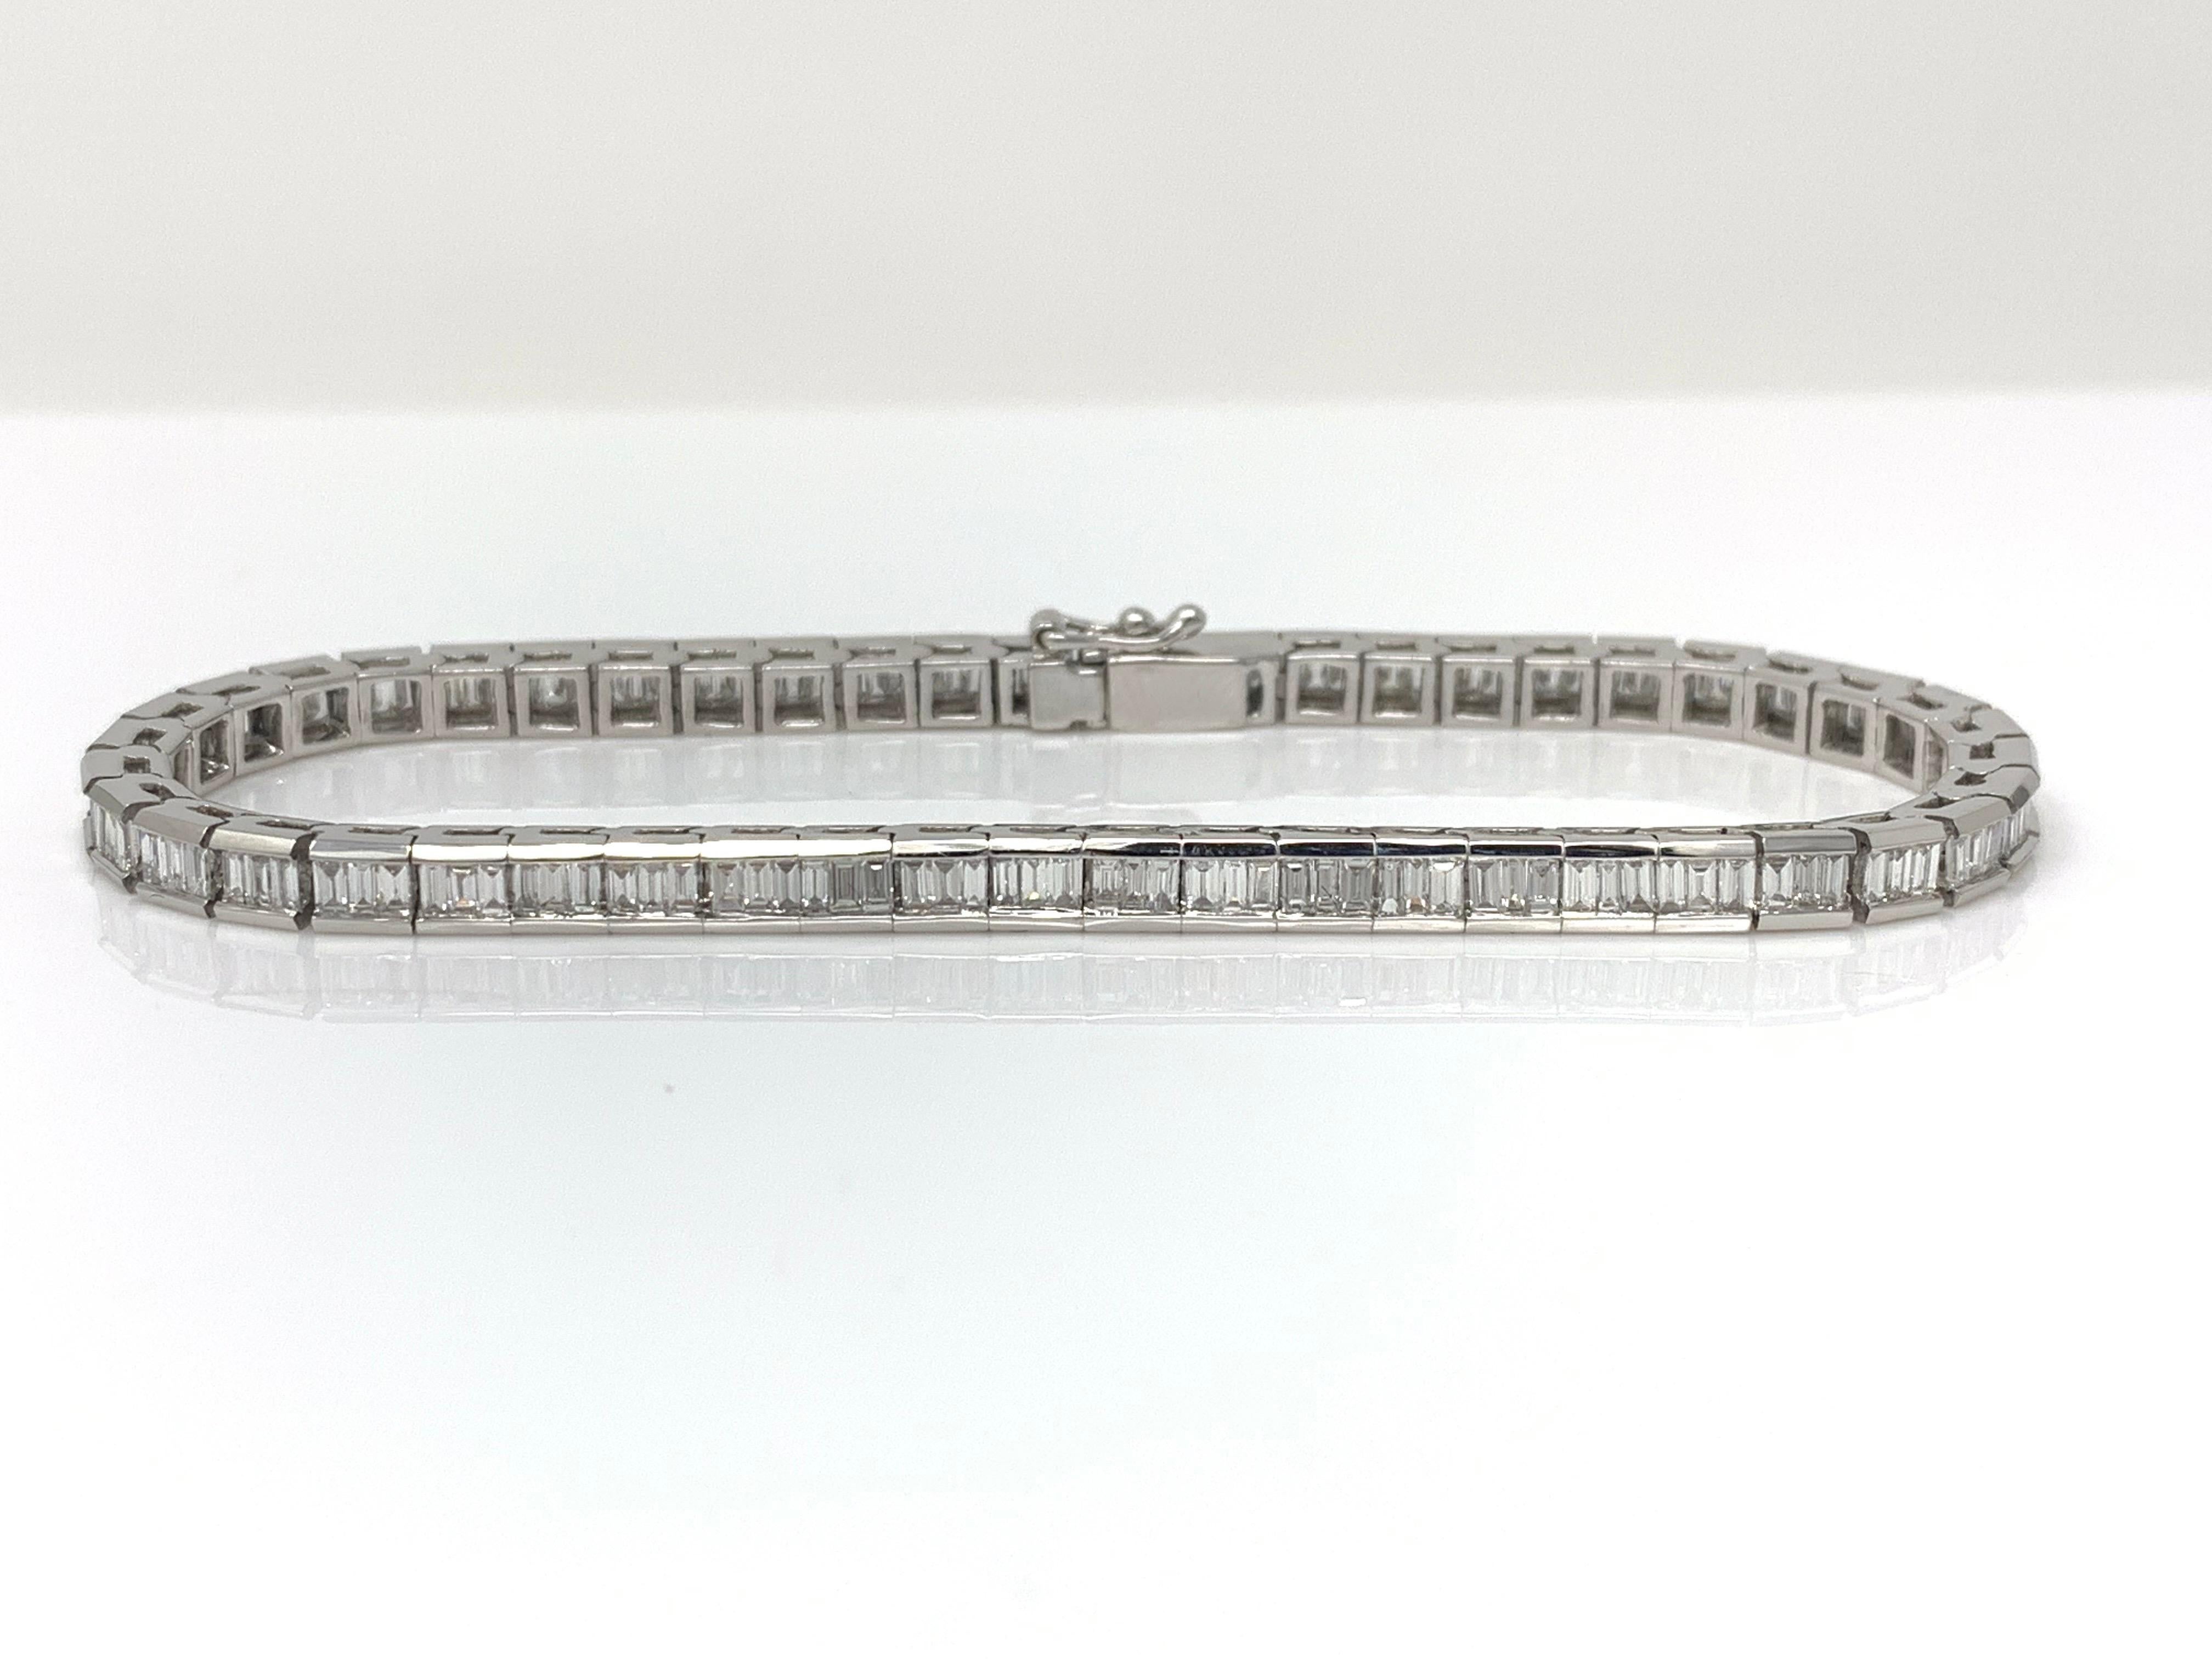 This gorgeous white baguette diamond bracelet is hand crafted in 18k white gold. The diamond weight is 2.97 carat with G-H color and VS clarity. The gold weight is 17.600 grams. The length of the bracelet is 7 1/2 inches.